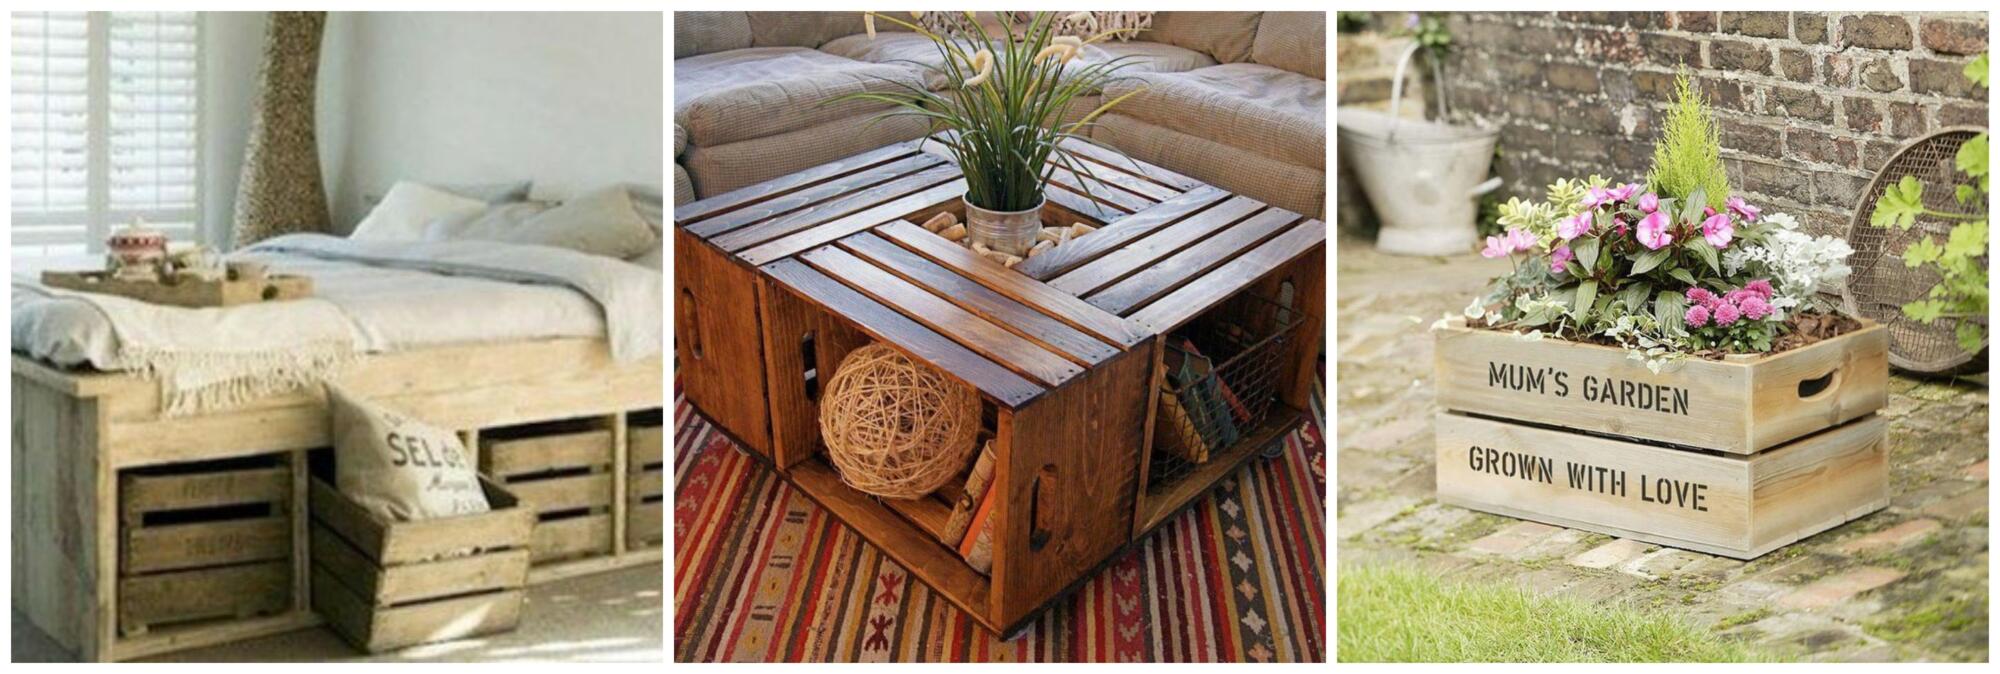 A collage of wooden crates and furniture for inspiring ideas.